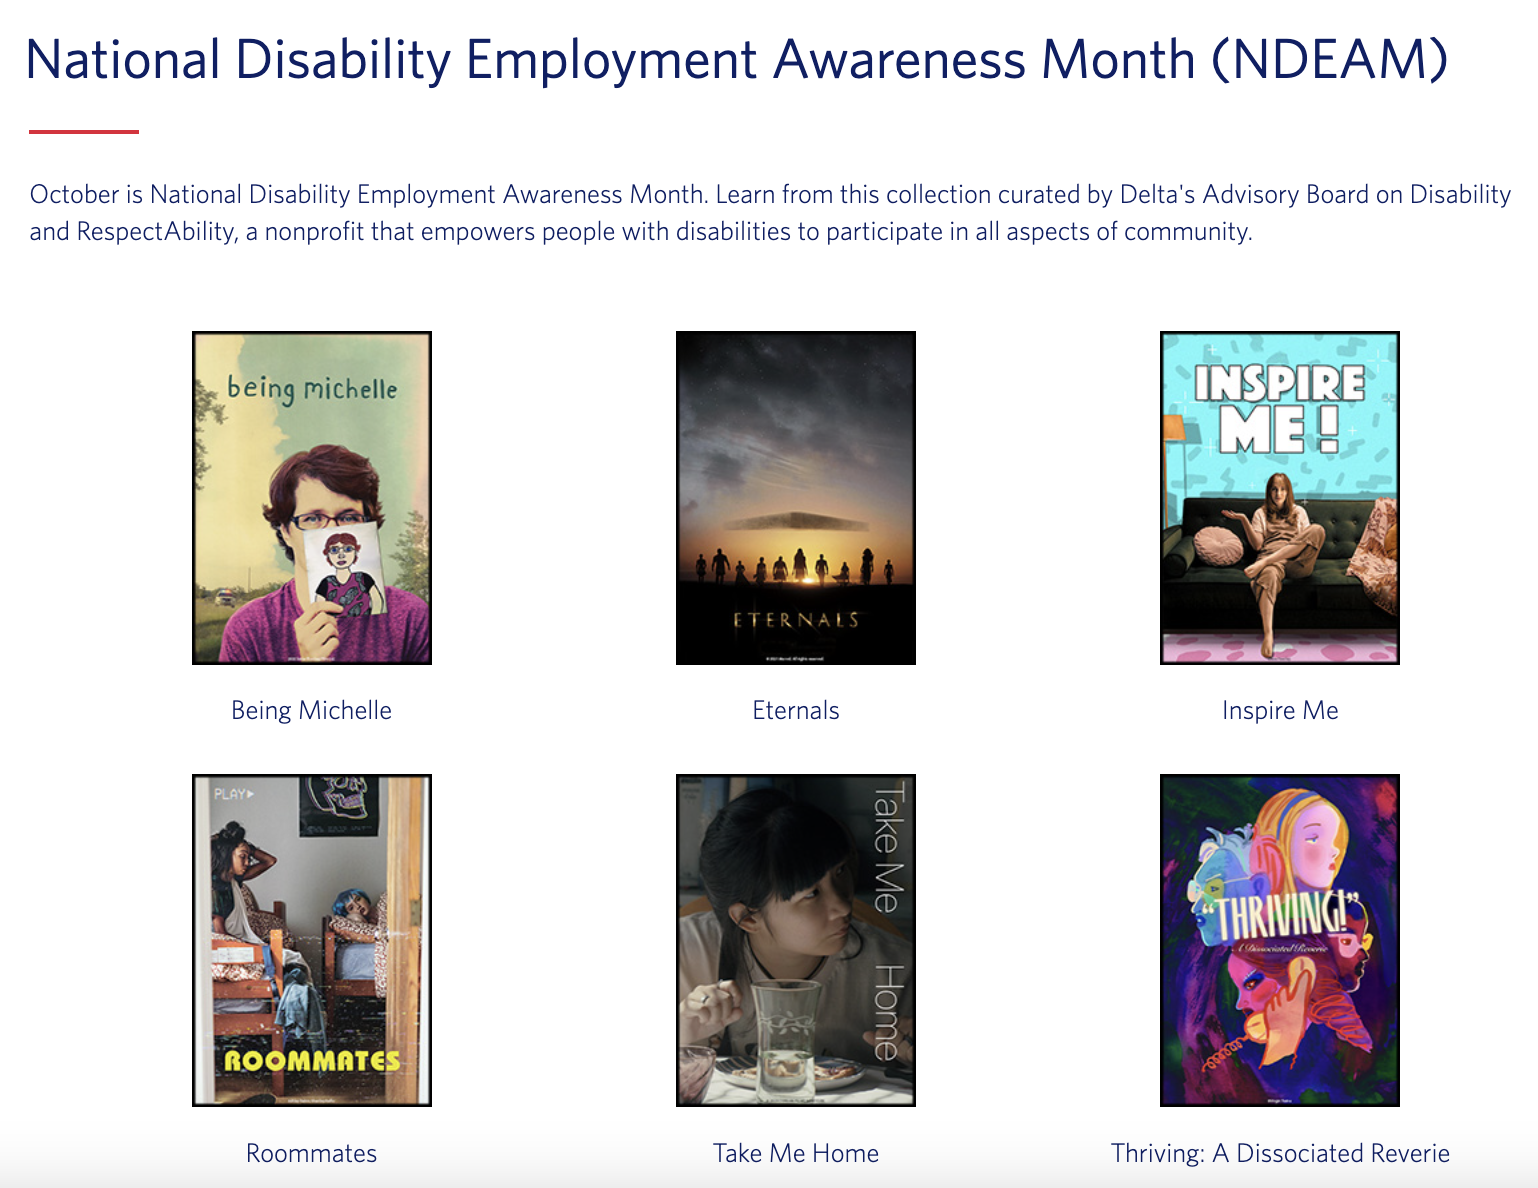 Screenshot of Delta's website showing film collection for NDEAM 2023, with posters for six of the films. Text: "October is National Disability Employment Awareness Month. Learn from this collection curated by Delta's Advisory Board on Disability and RespectAbility, a nonprofit that empowers people with disabilities to participate in all aspects of community."